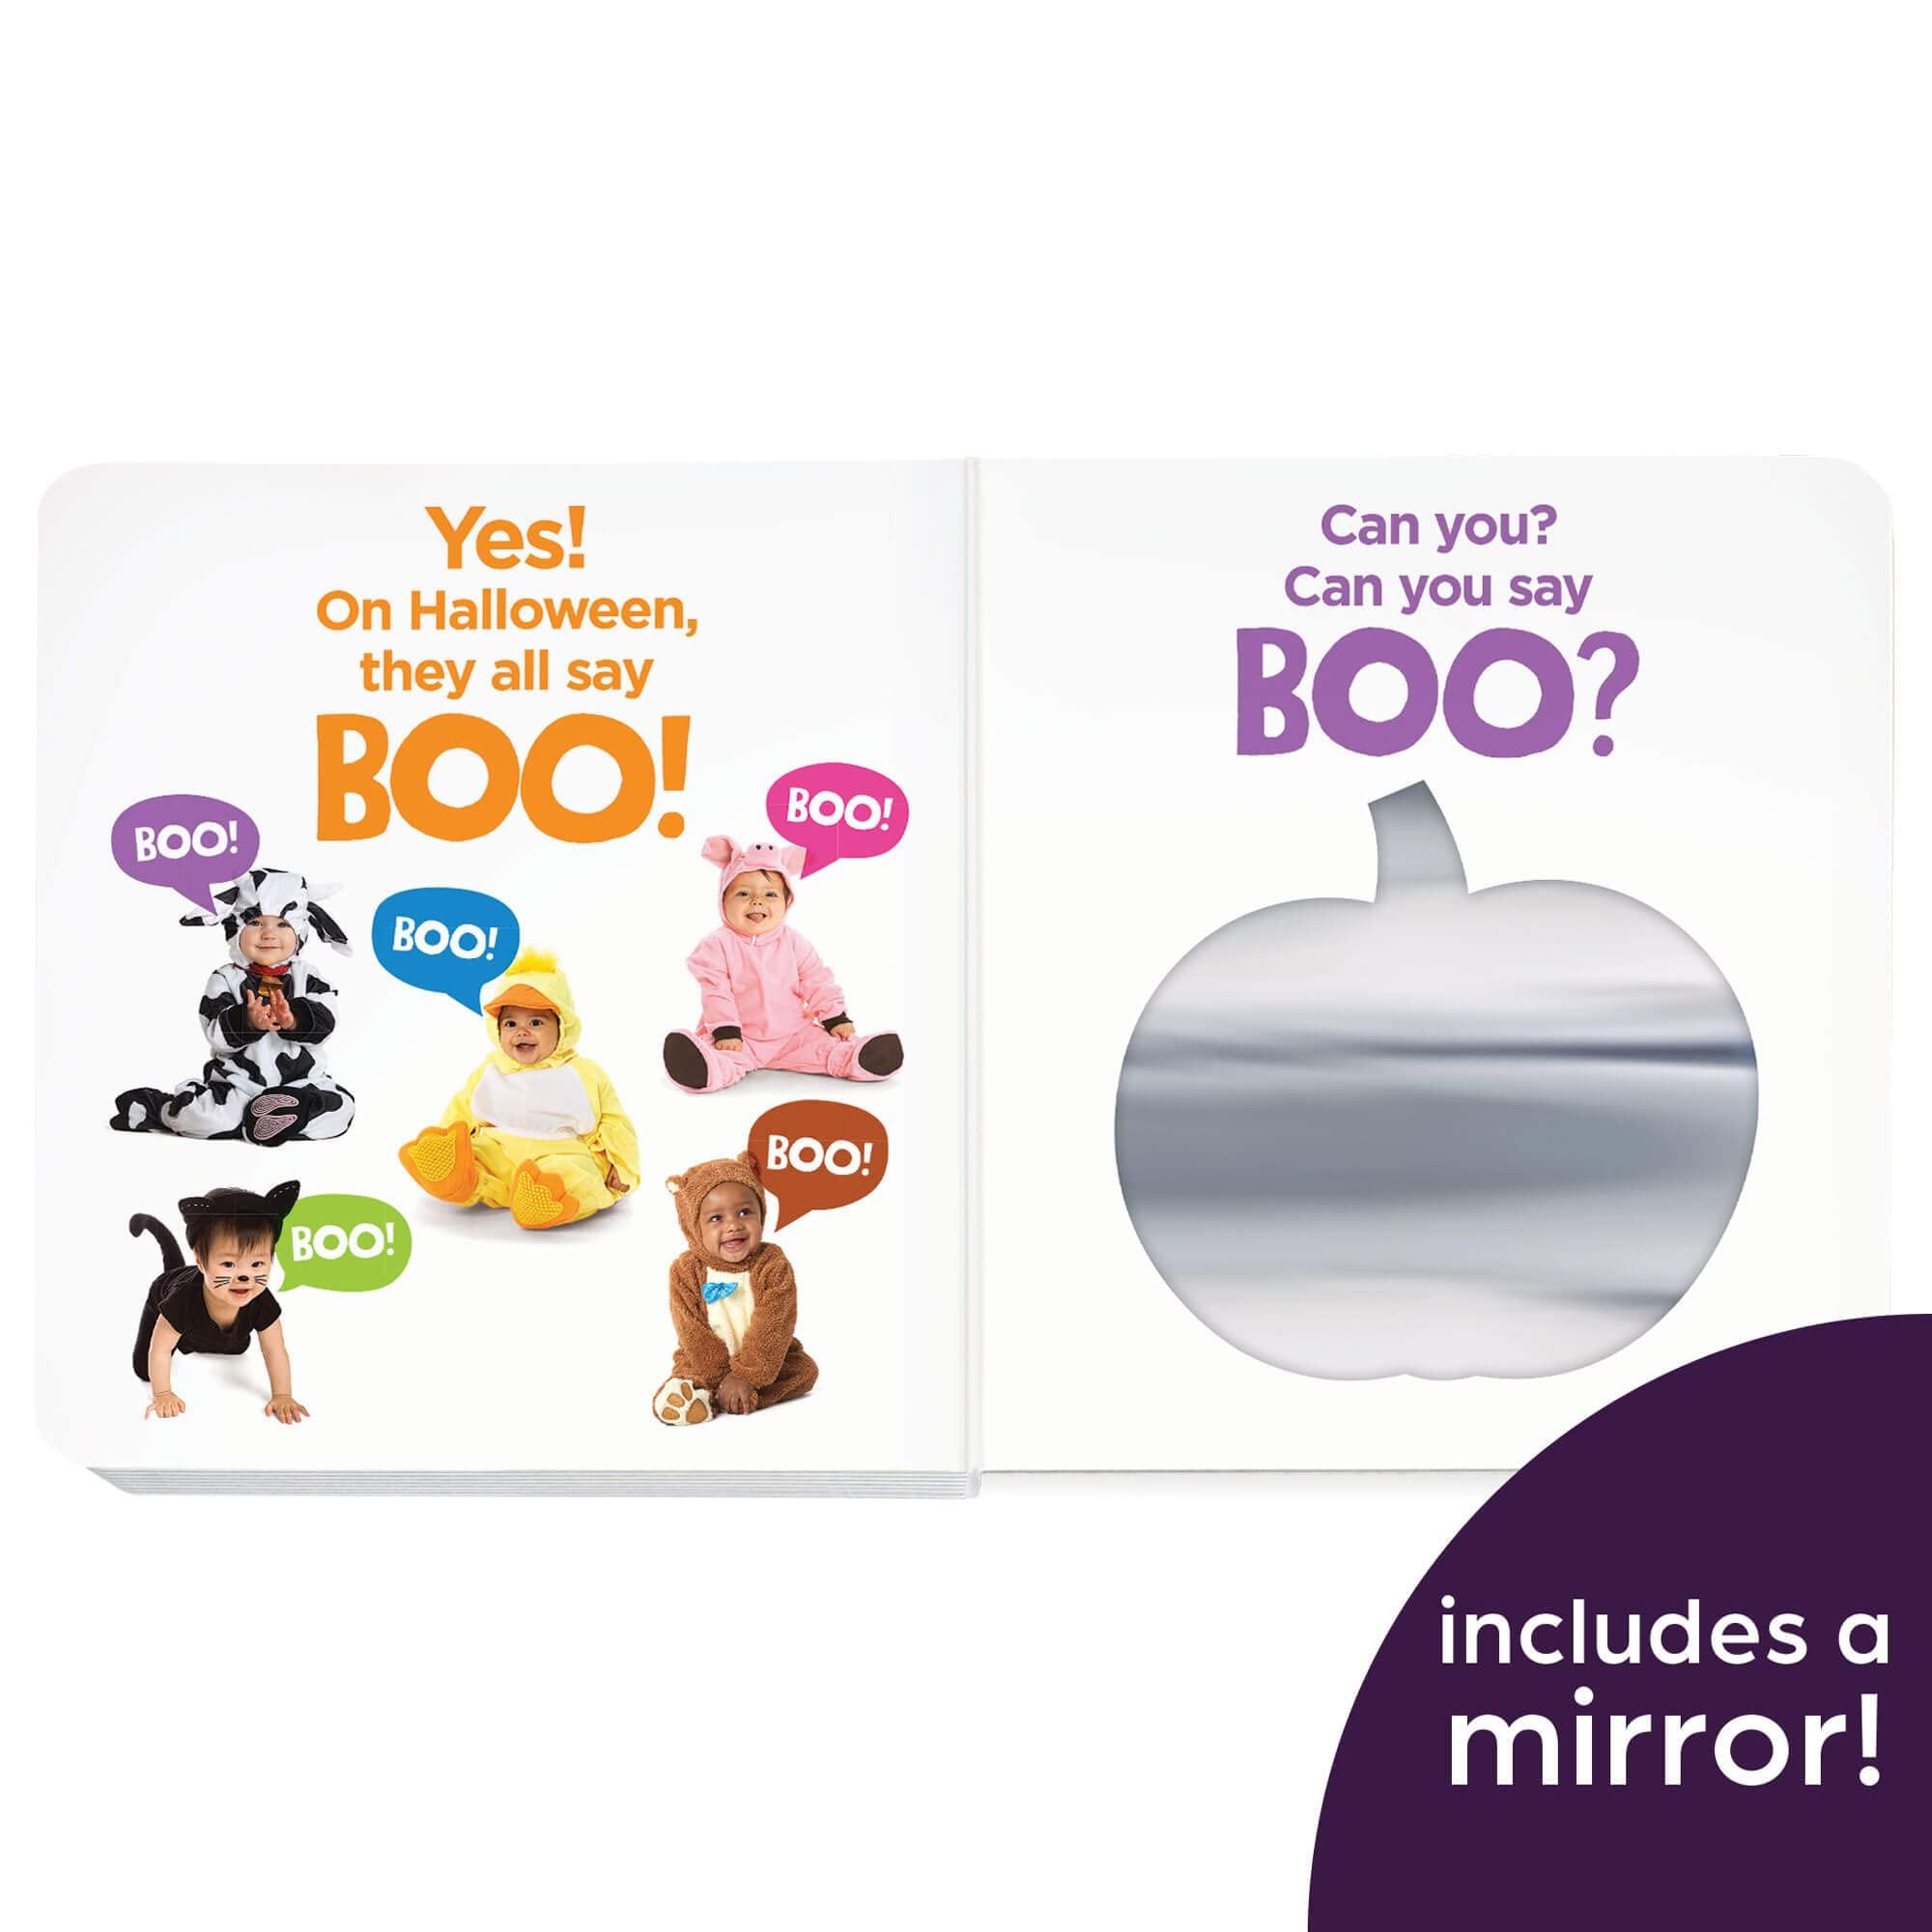 Who Says Boo?: Baby's First Halloween Book (Includes A Mirror!)